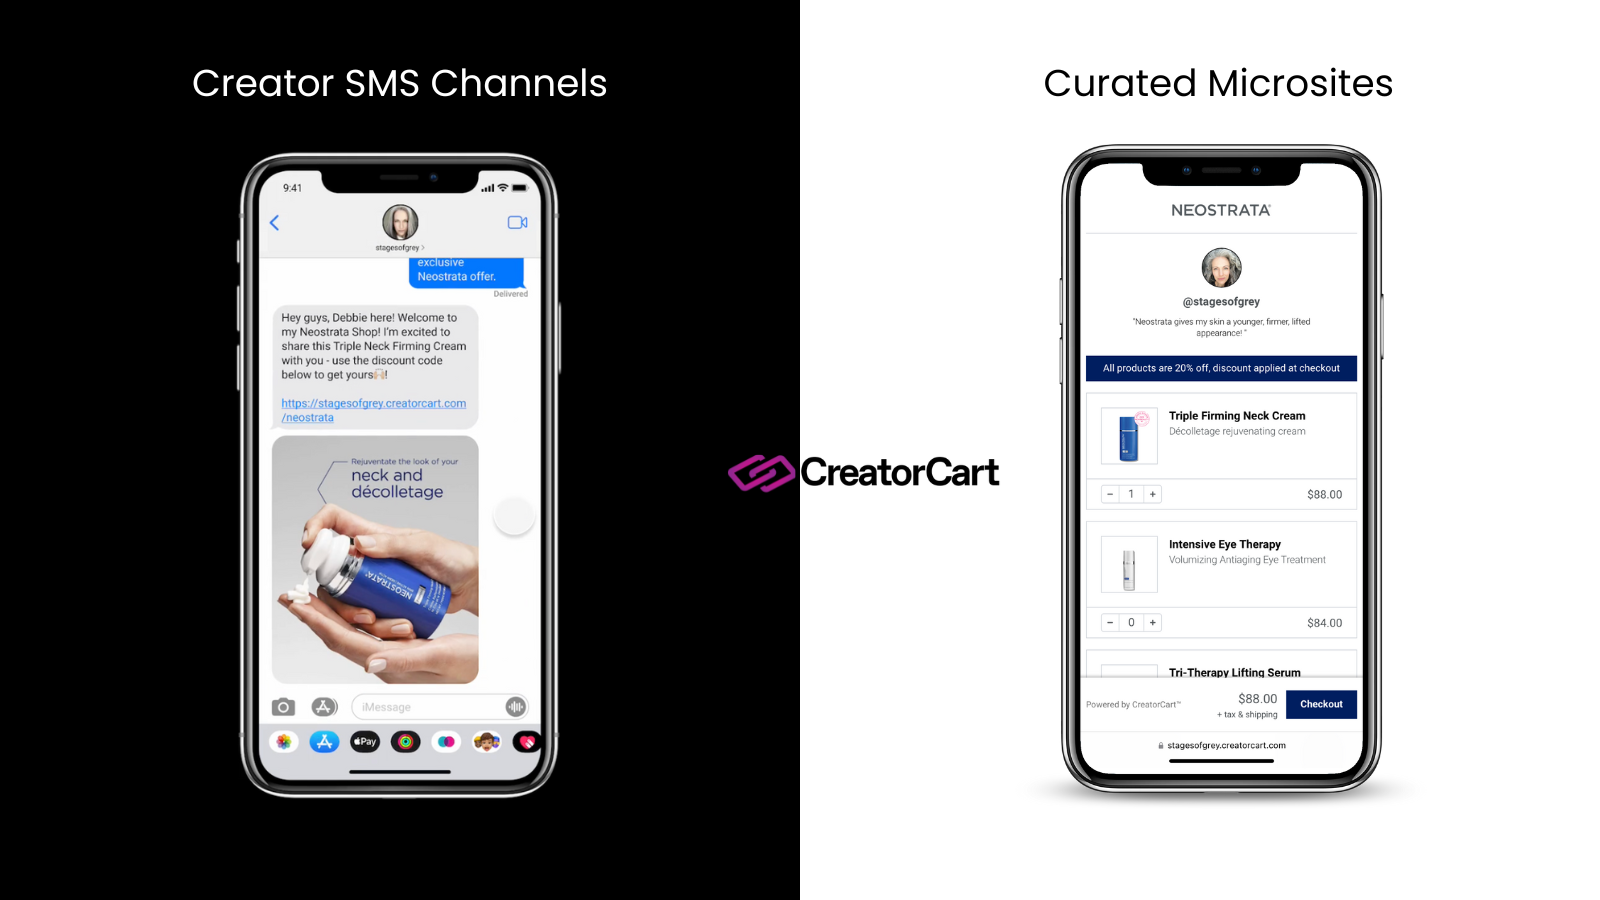 Creator SMS and curated microsites